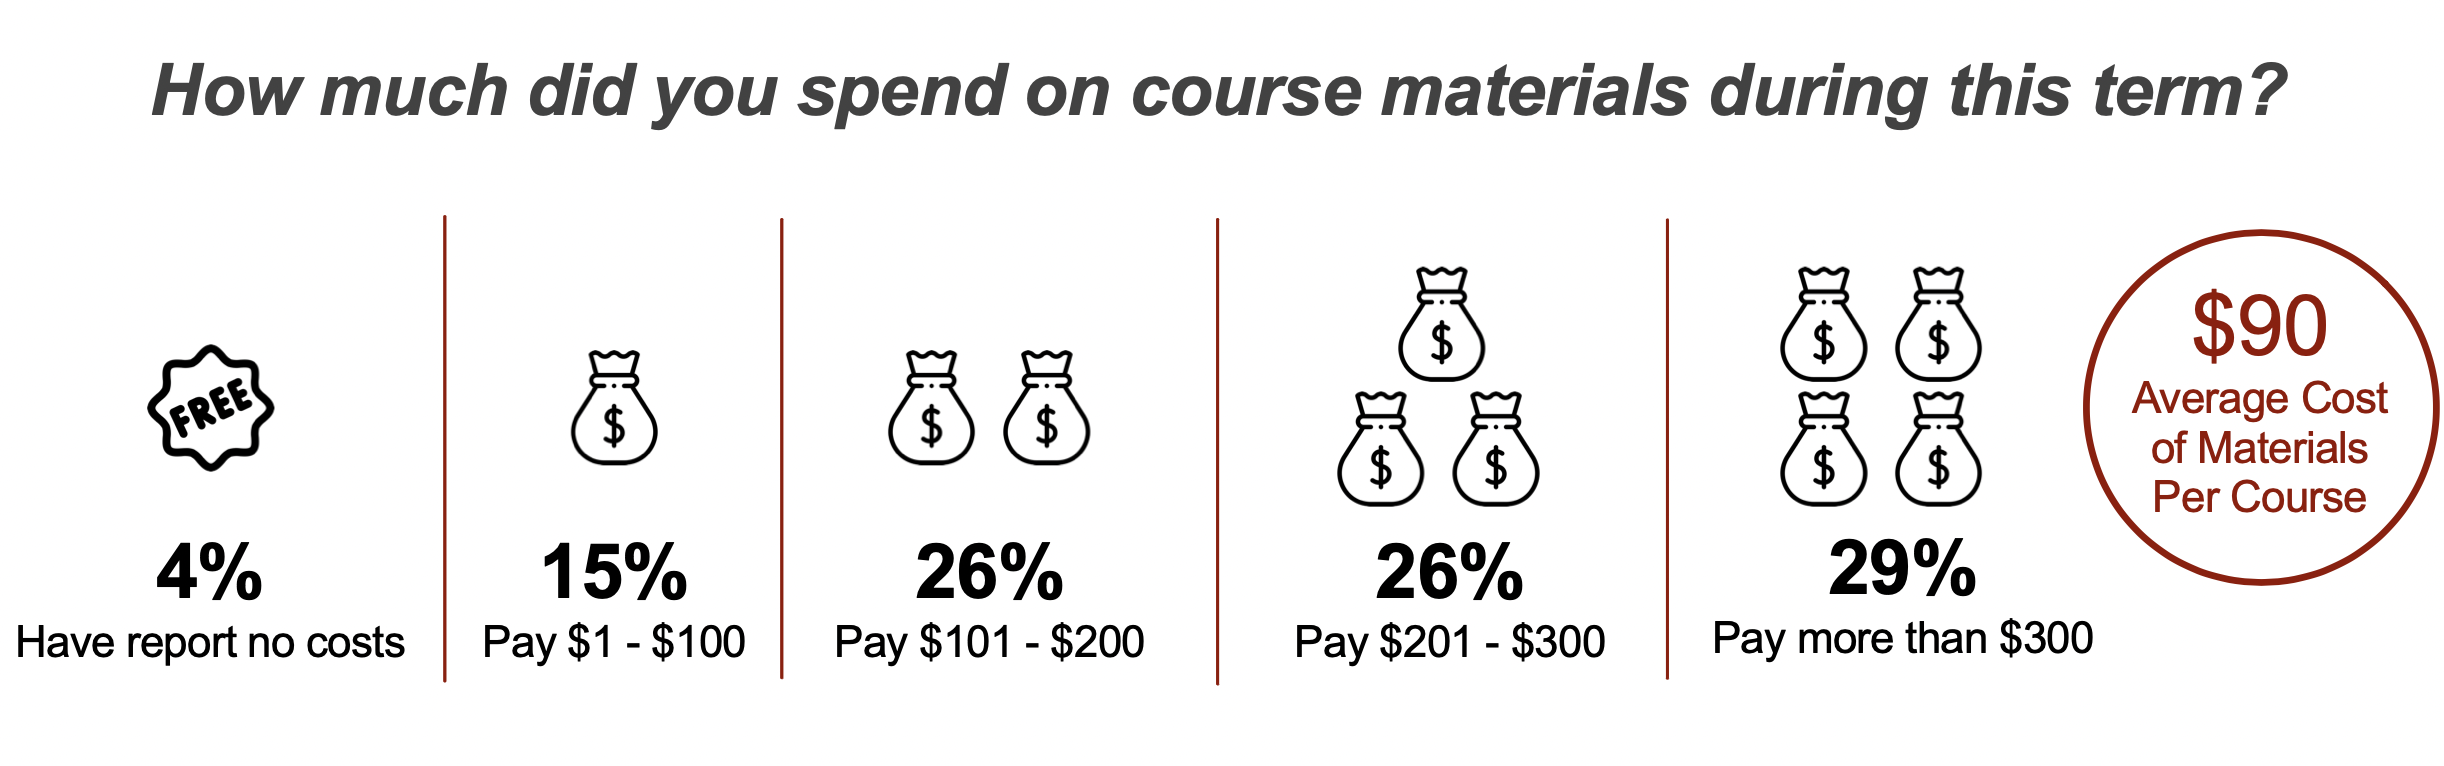 Average costs for course materials